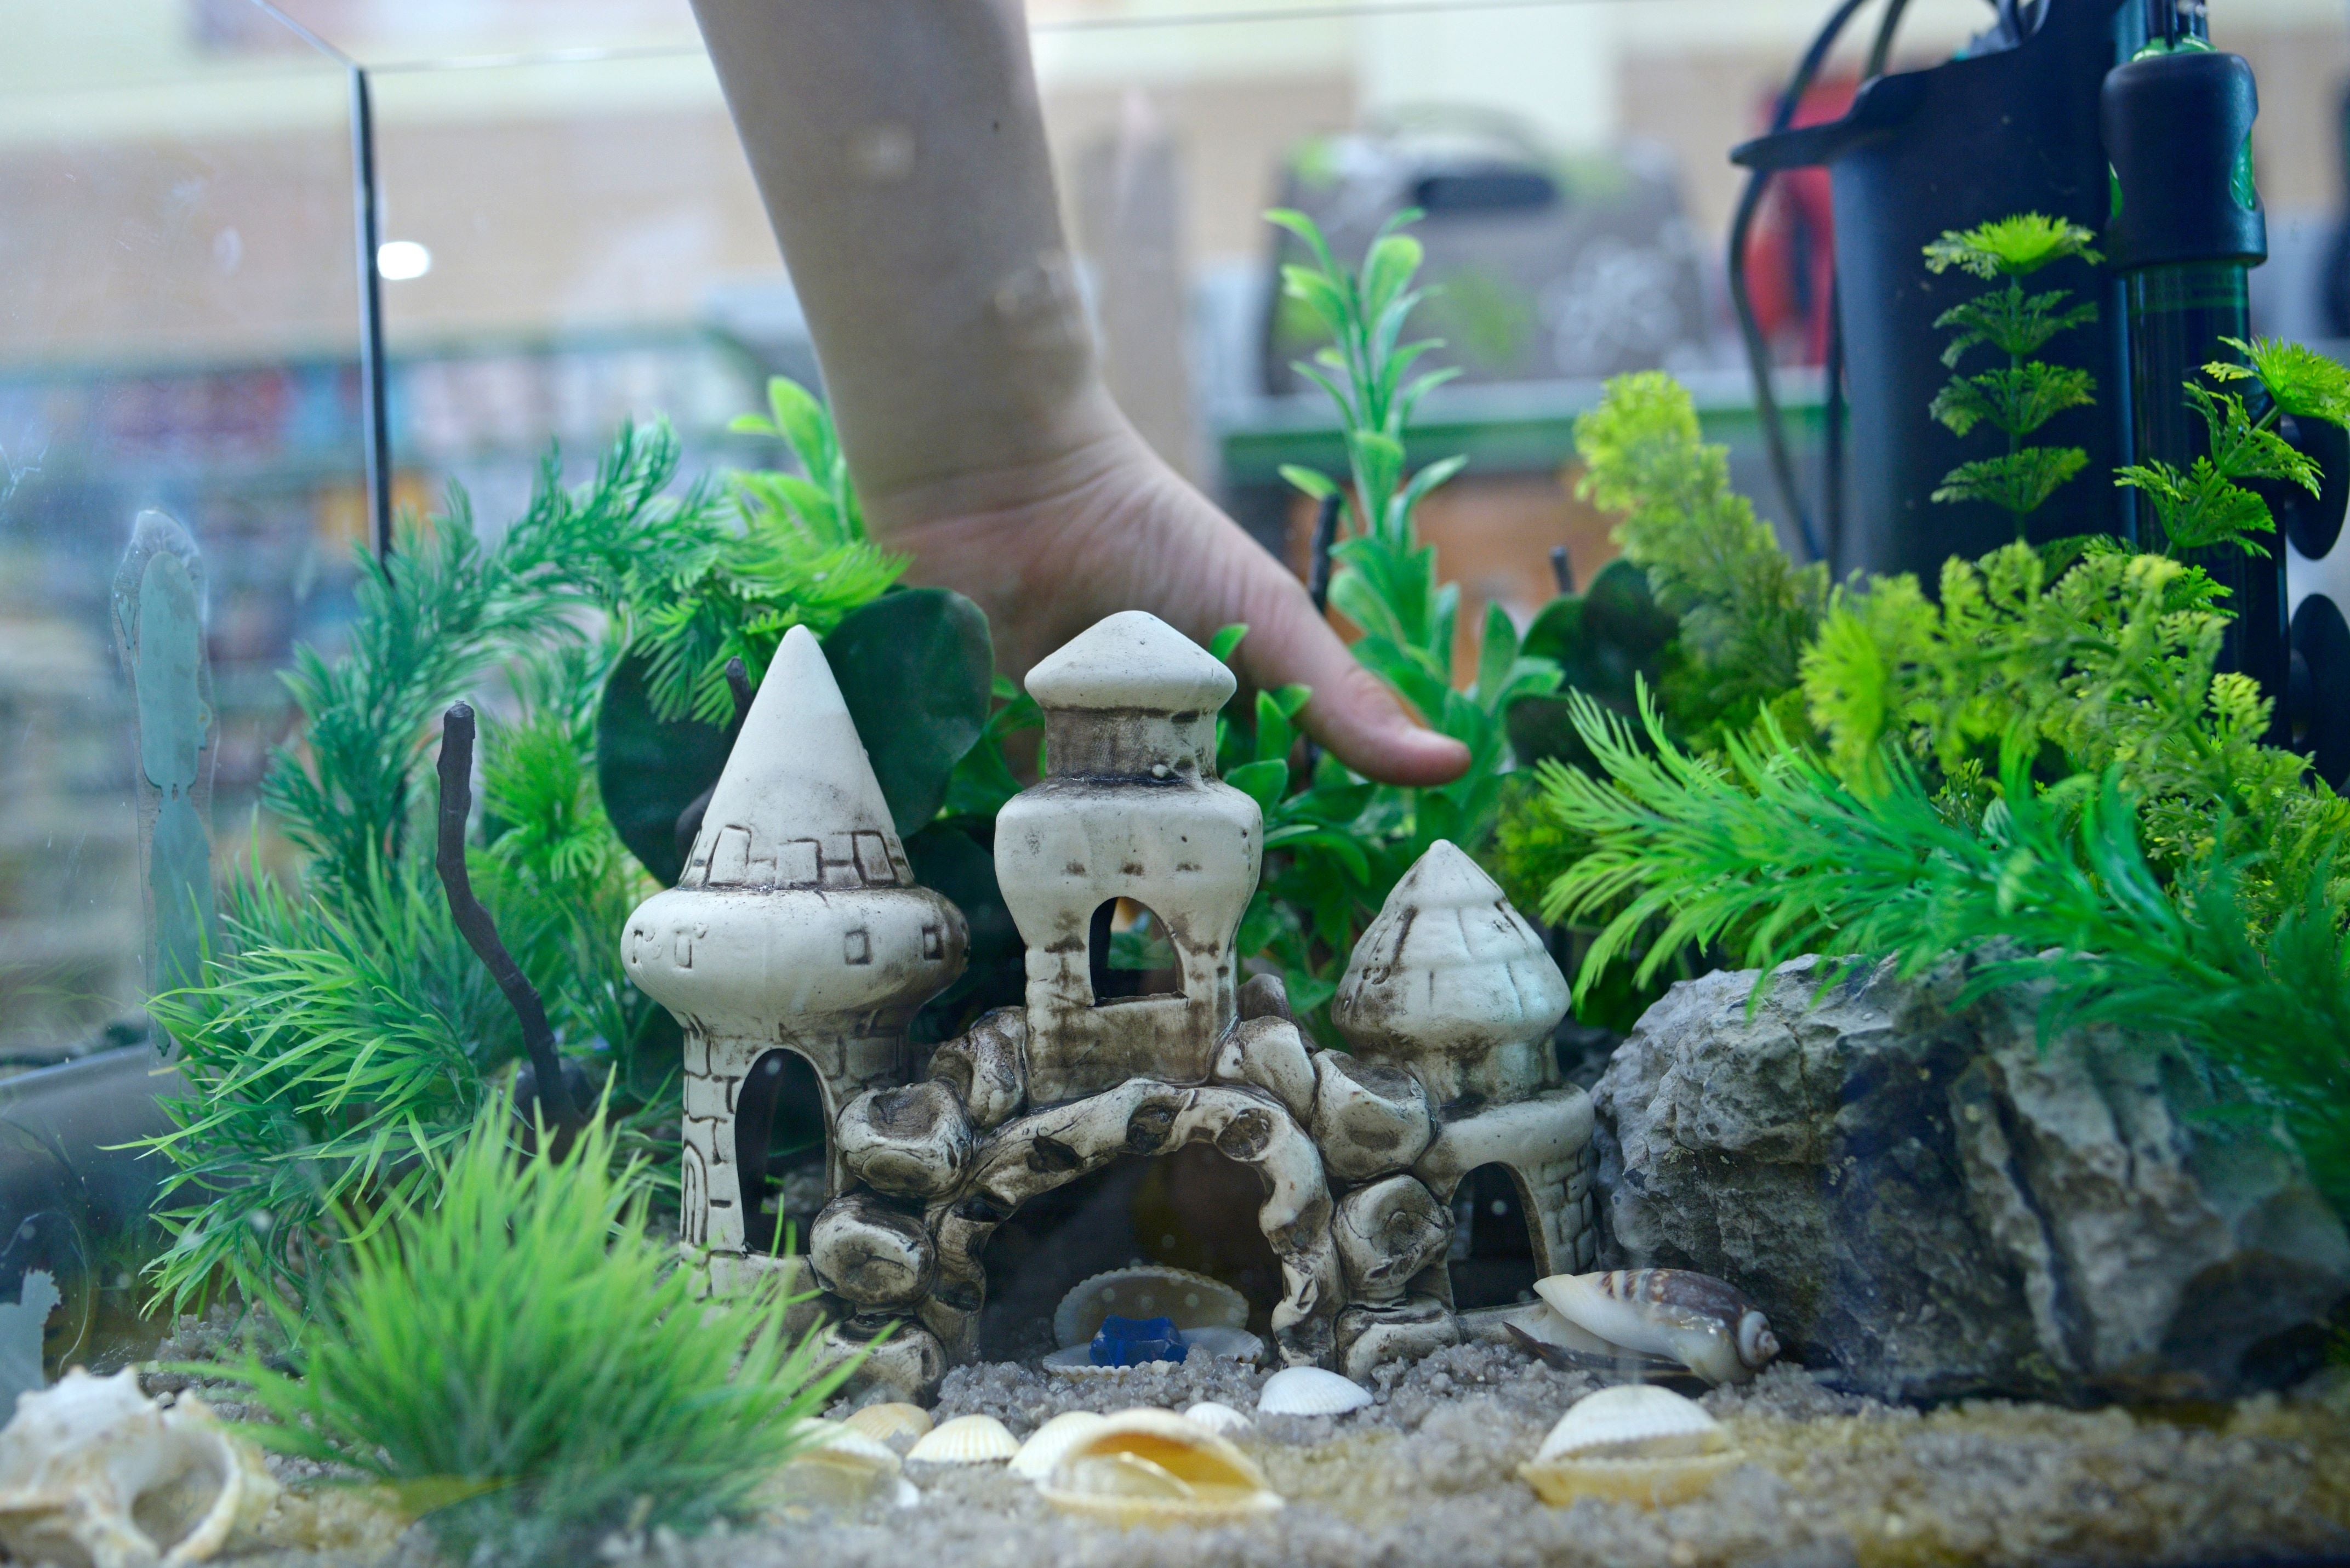 15 Things From Amazon To Help Your Home Aquarium Thrive